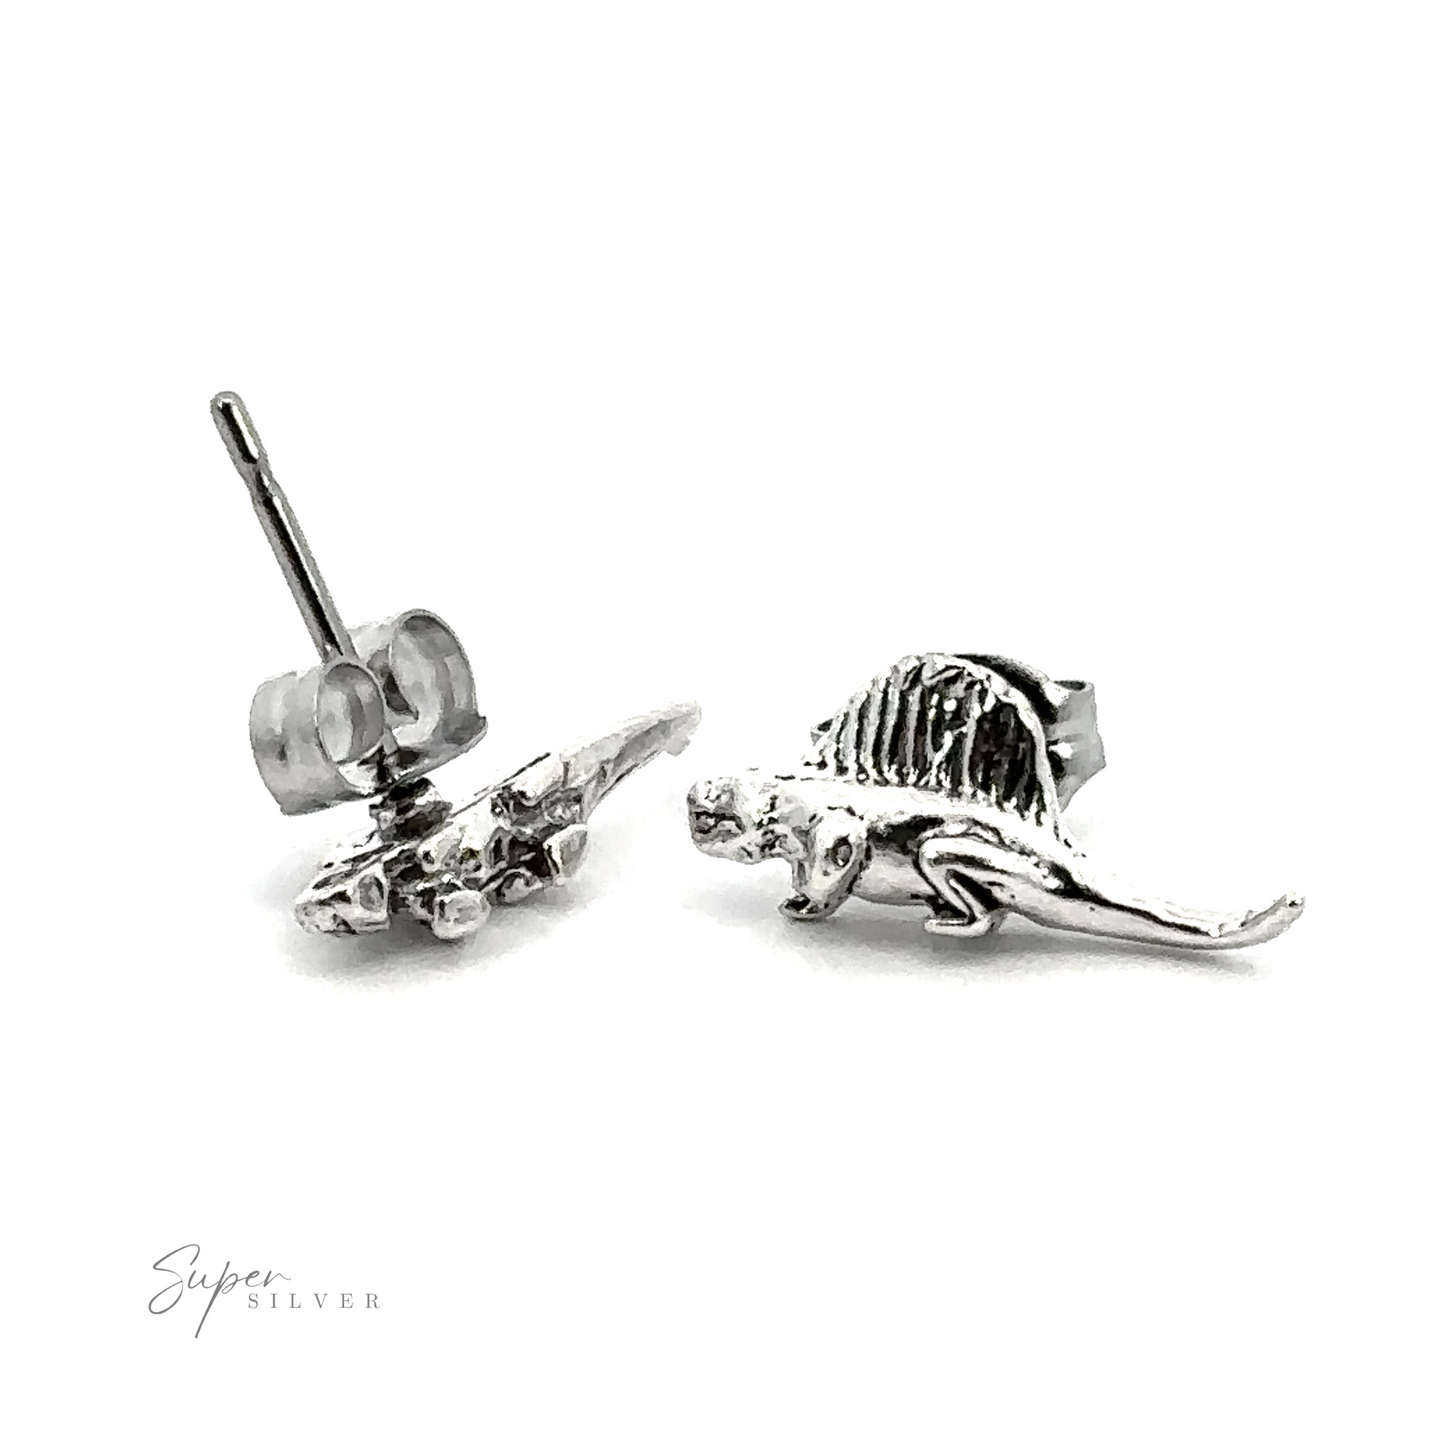 These dimetrodon stud earrings are the perfect accessory for dinosaur lovers. (Replace "dimetrodon stud earrings" with "Dimetrodon Studs.")